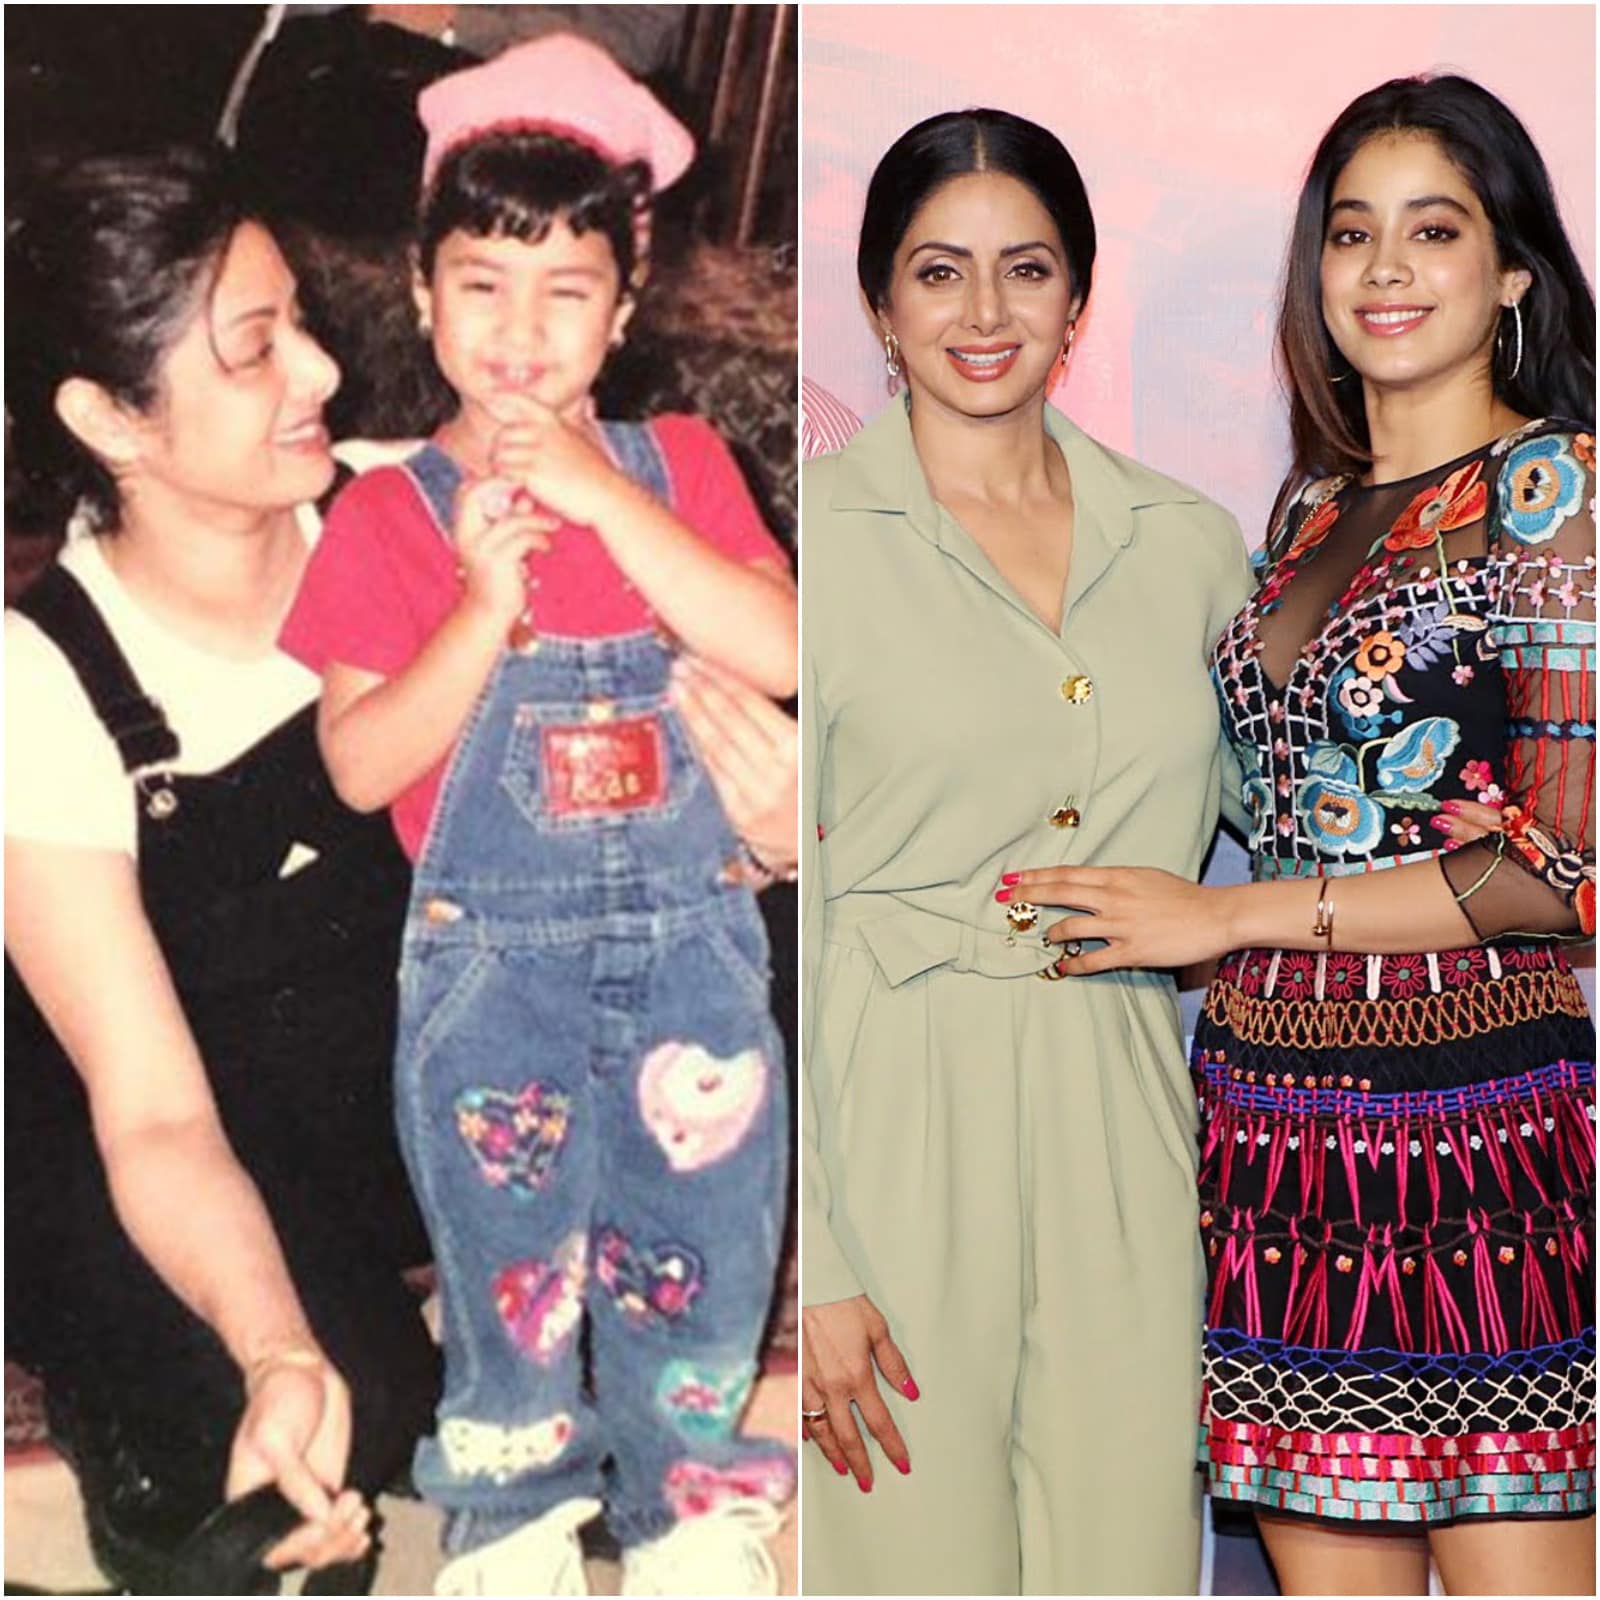 Shridevi Ki Sexi Xvideos - Janhvi Kapoor Reveals Sridevi Told Her 'Not To Get Into It' When She Told  Her About Acting Plans - News18